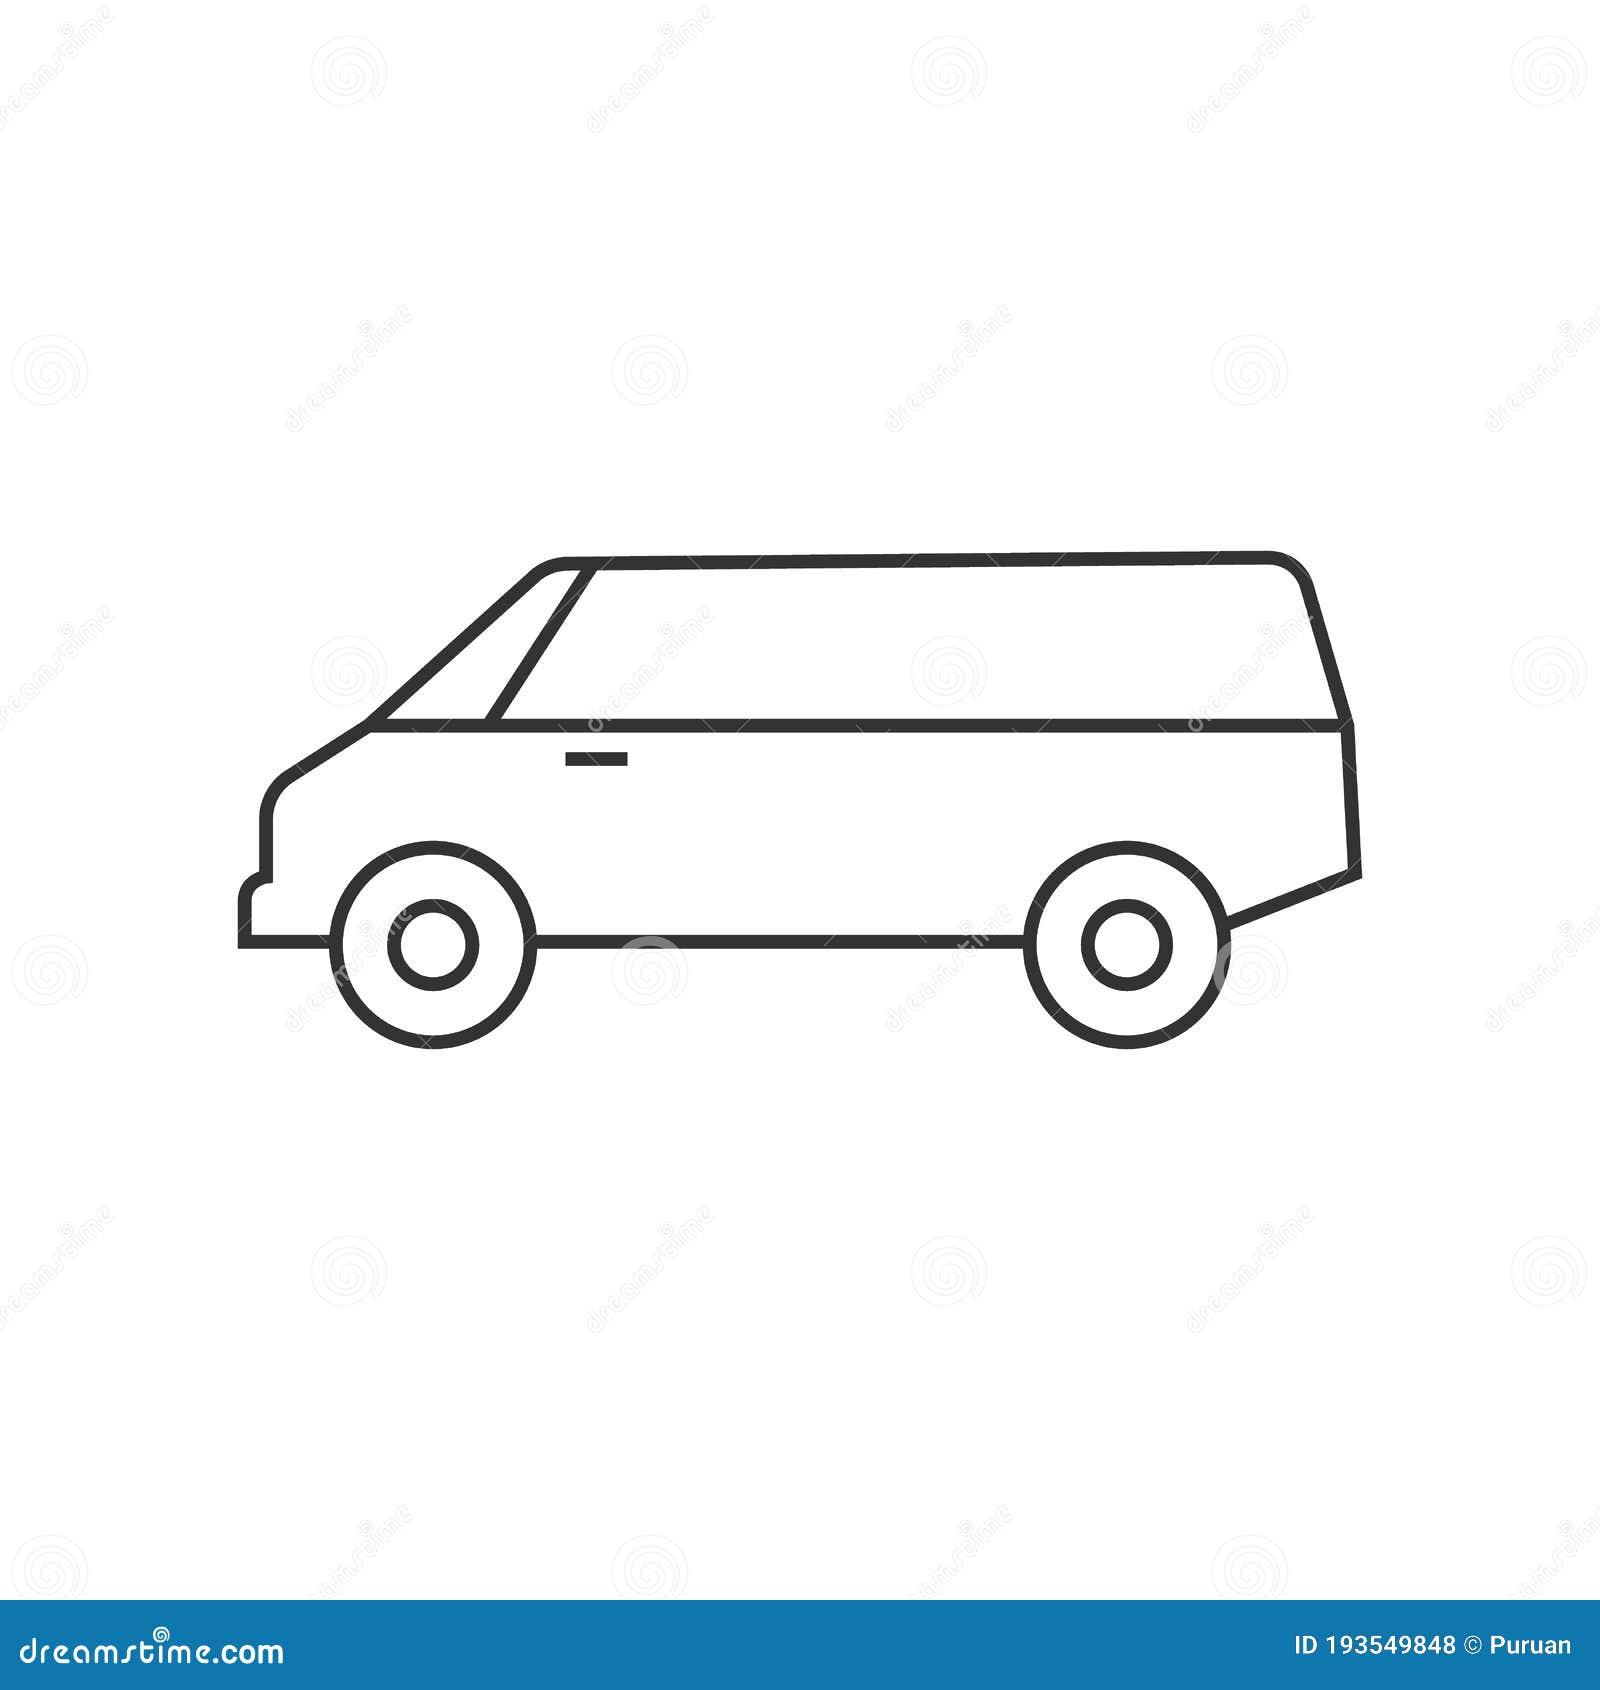 Outline icon - Van car stock vector. Illustration of business - 193549848